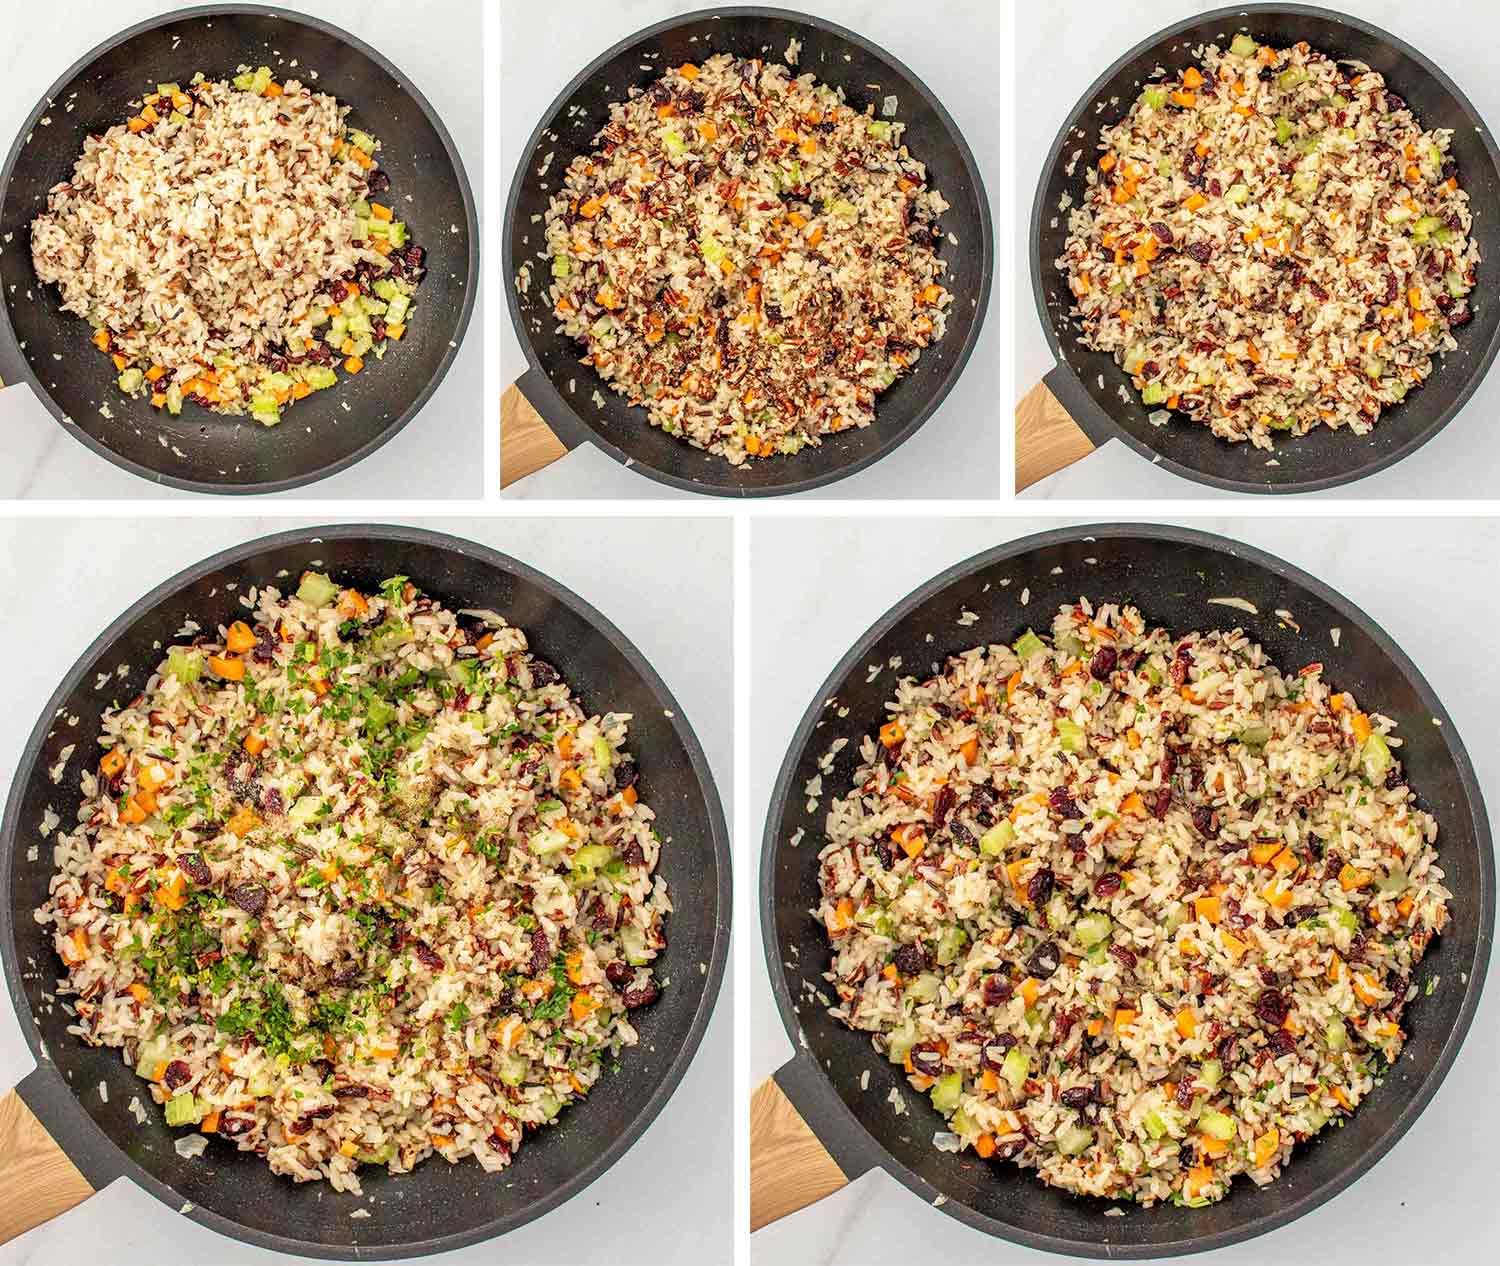 process shots showing how to make wild rice pilaf.